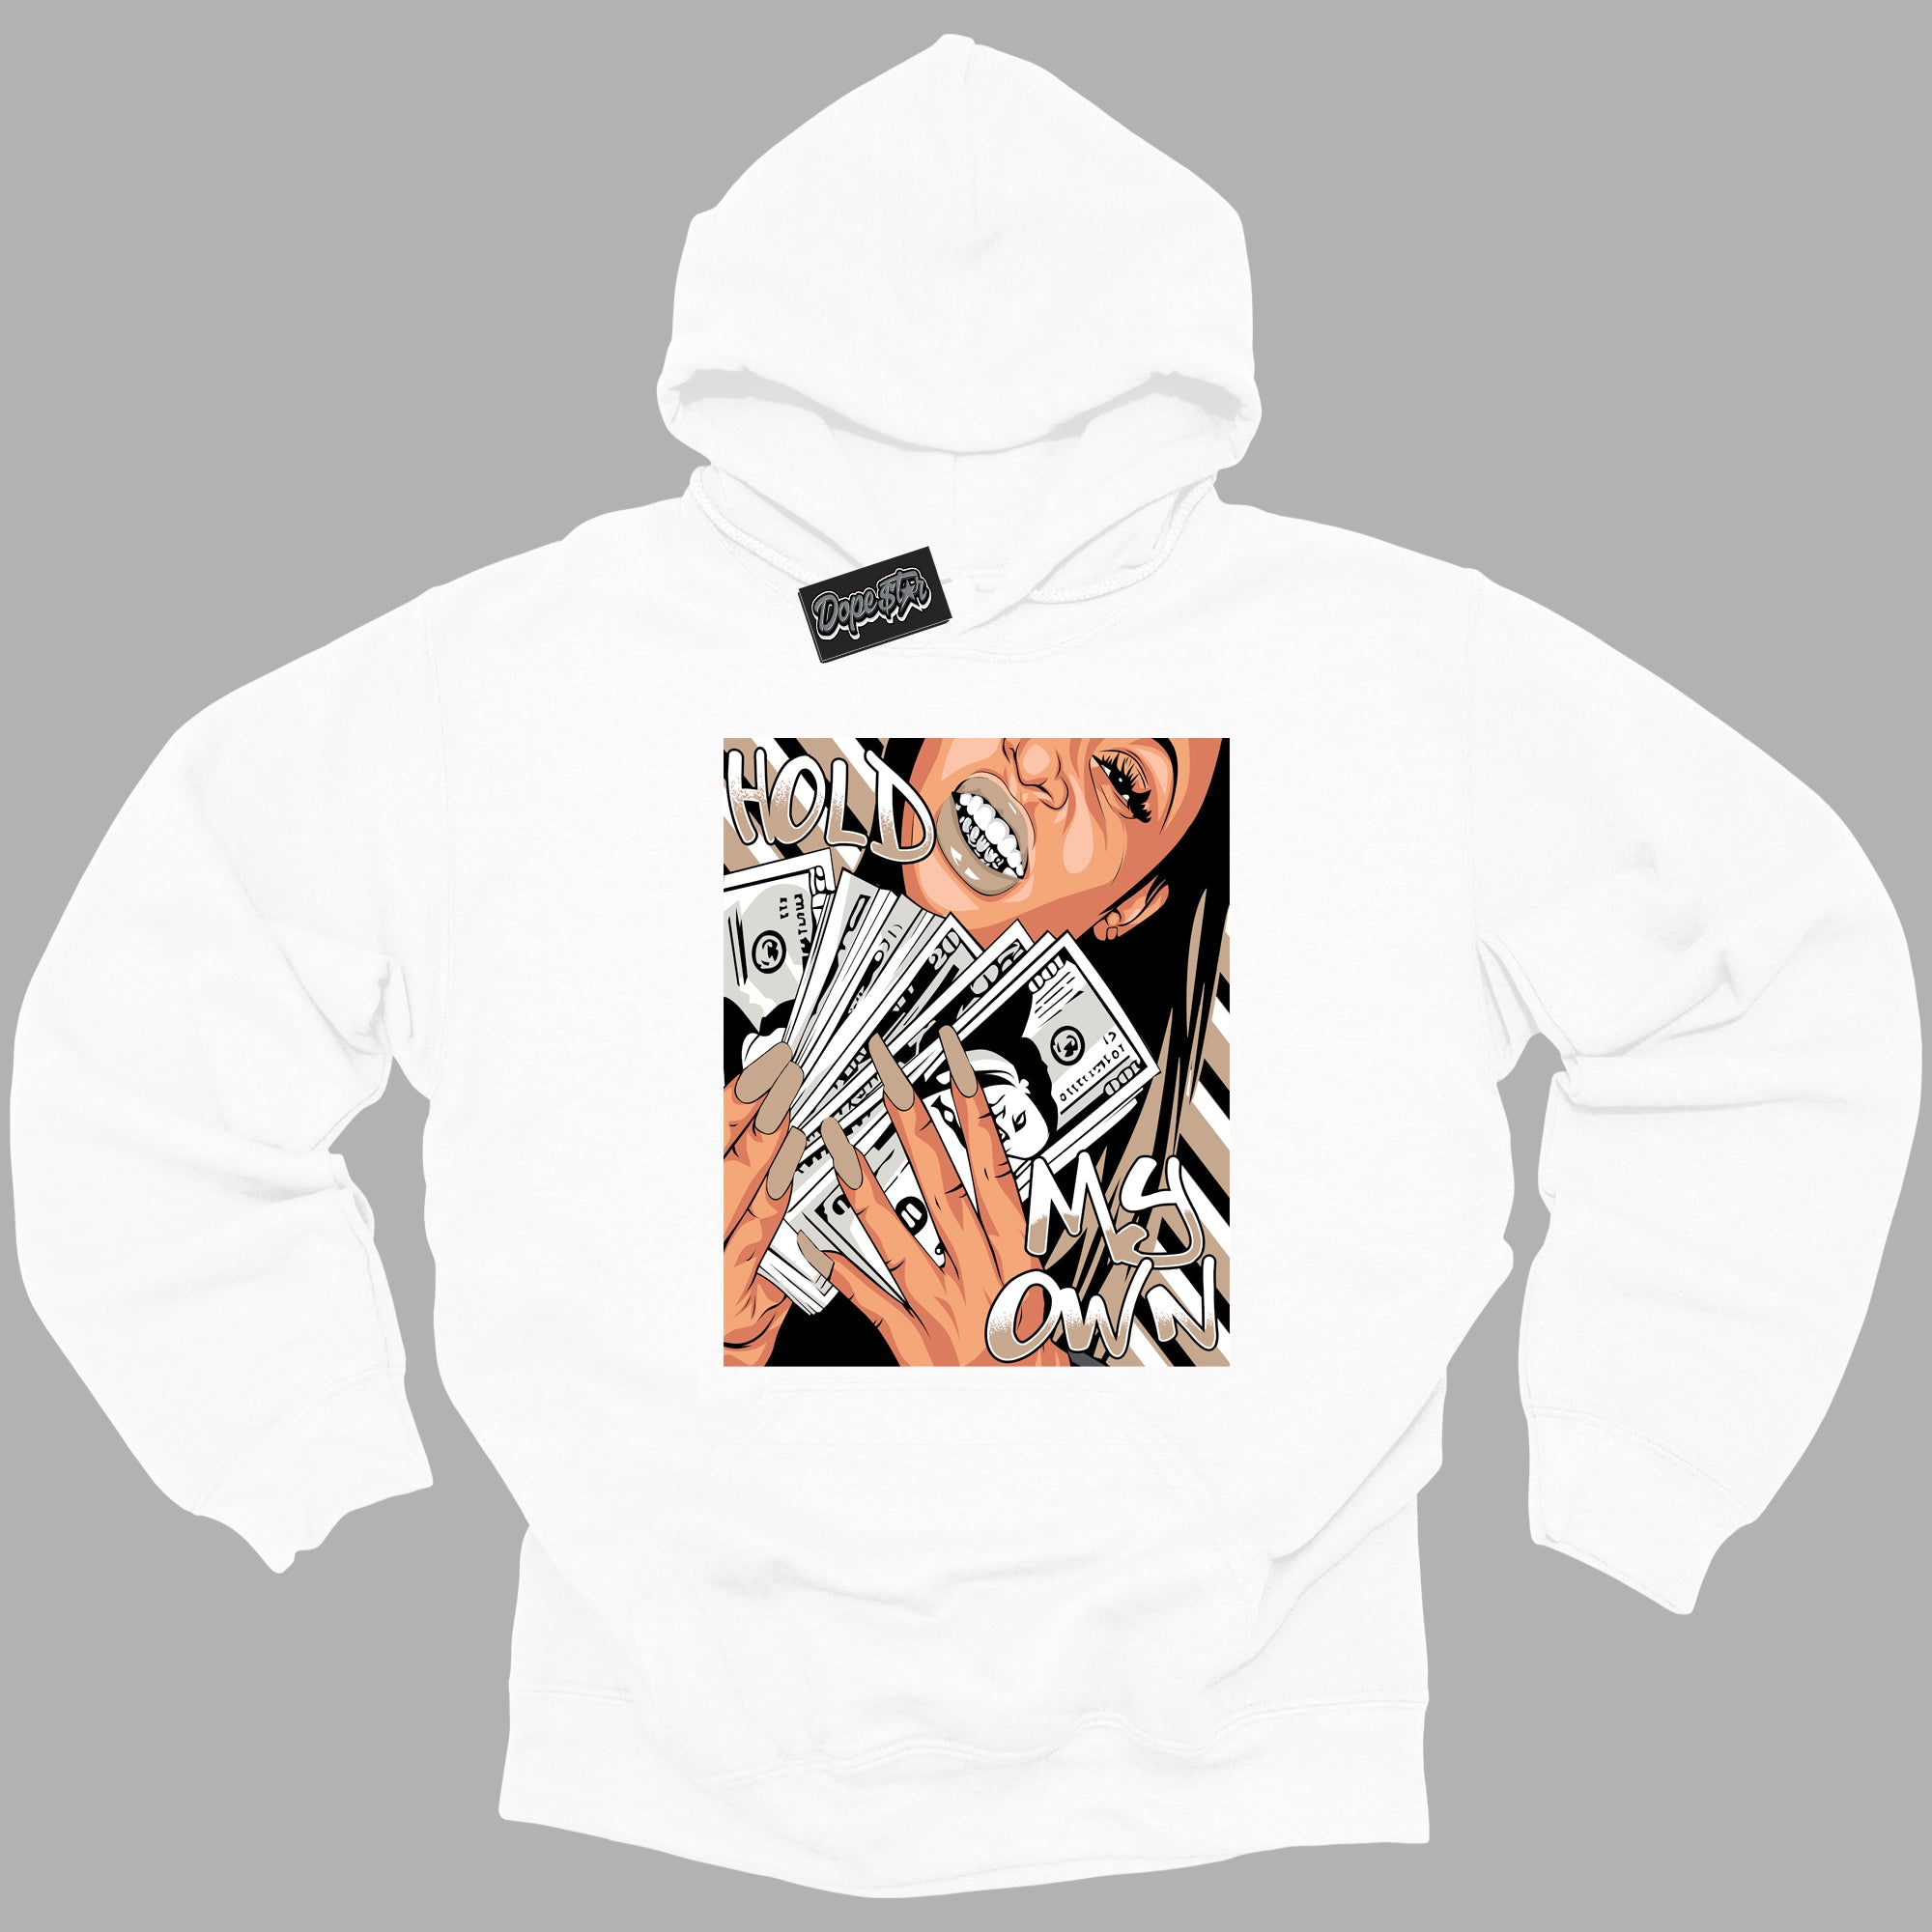 Cool White Graphic DopeStar Hoodie with “ Hold My Own “ print, that perfectly matches Palomino 1s sneakers